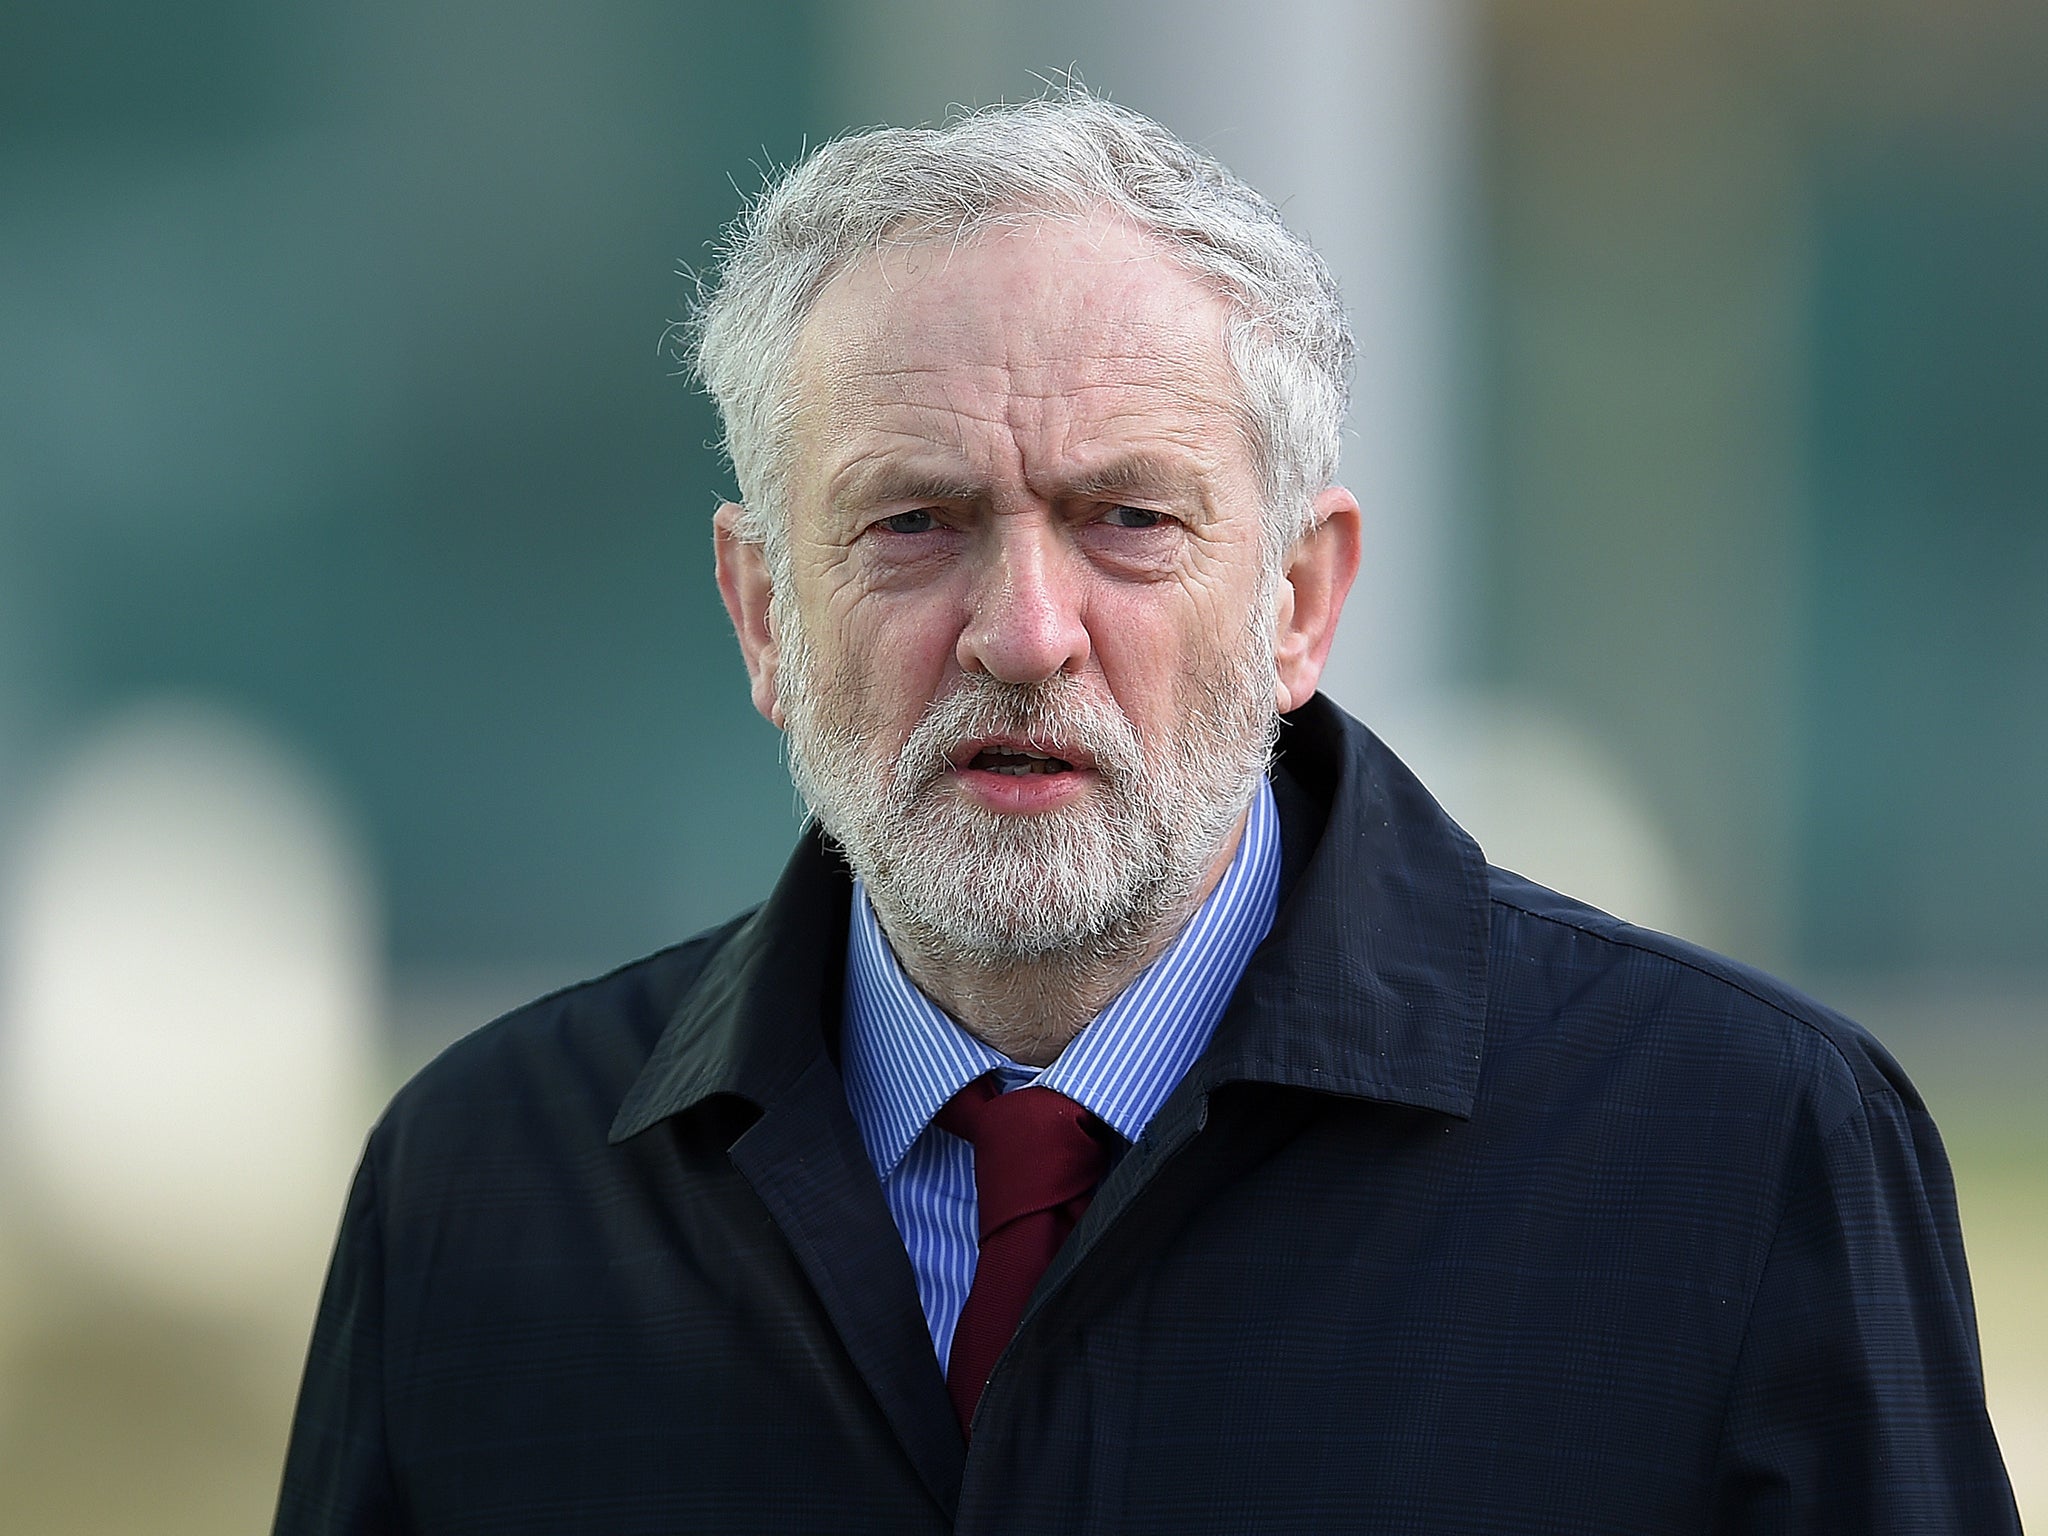 Labour leader Jeremy Corbyn is a strong supporter of Palestine